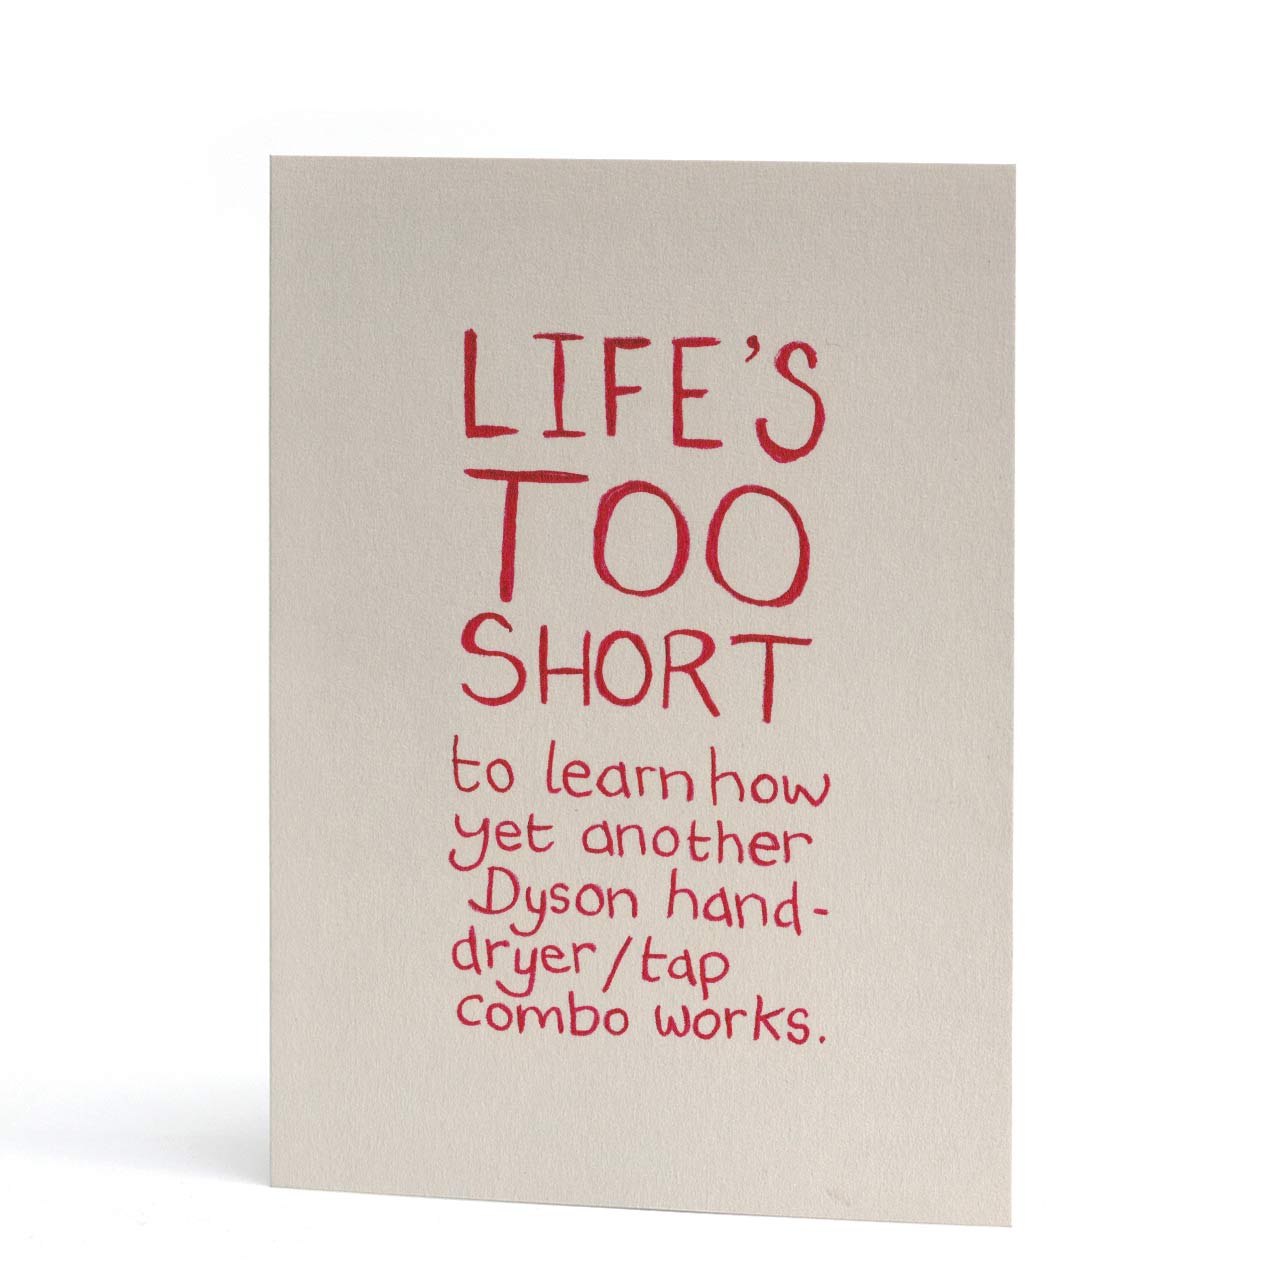 Life's Too Short Hand-dryer Card